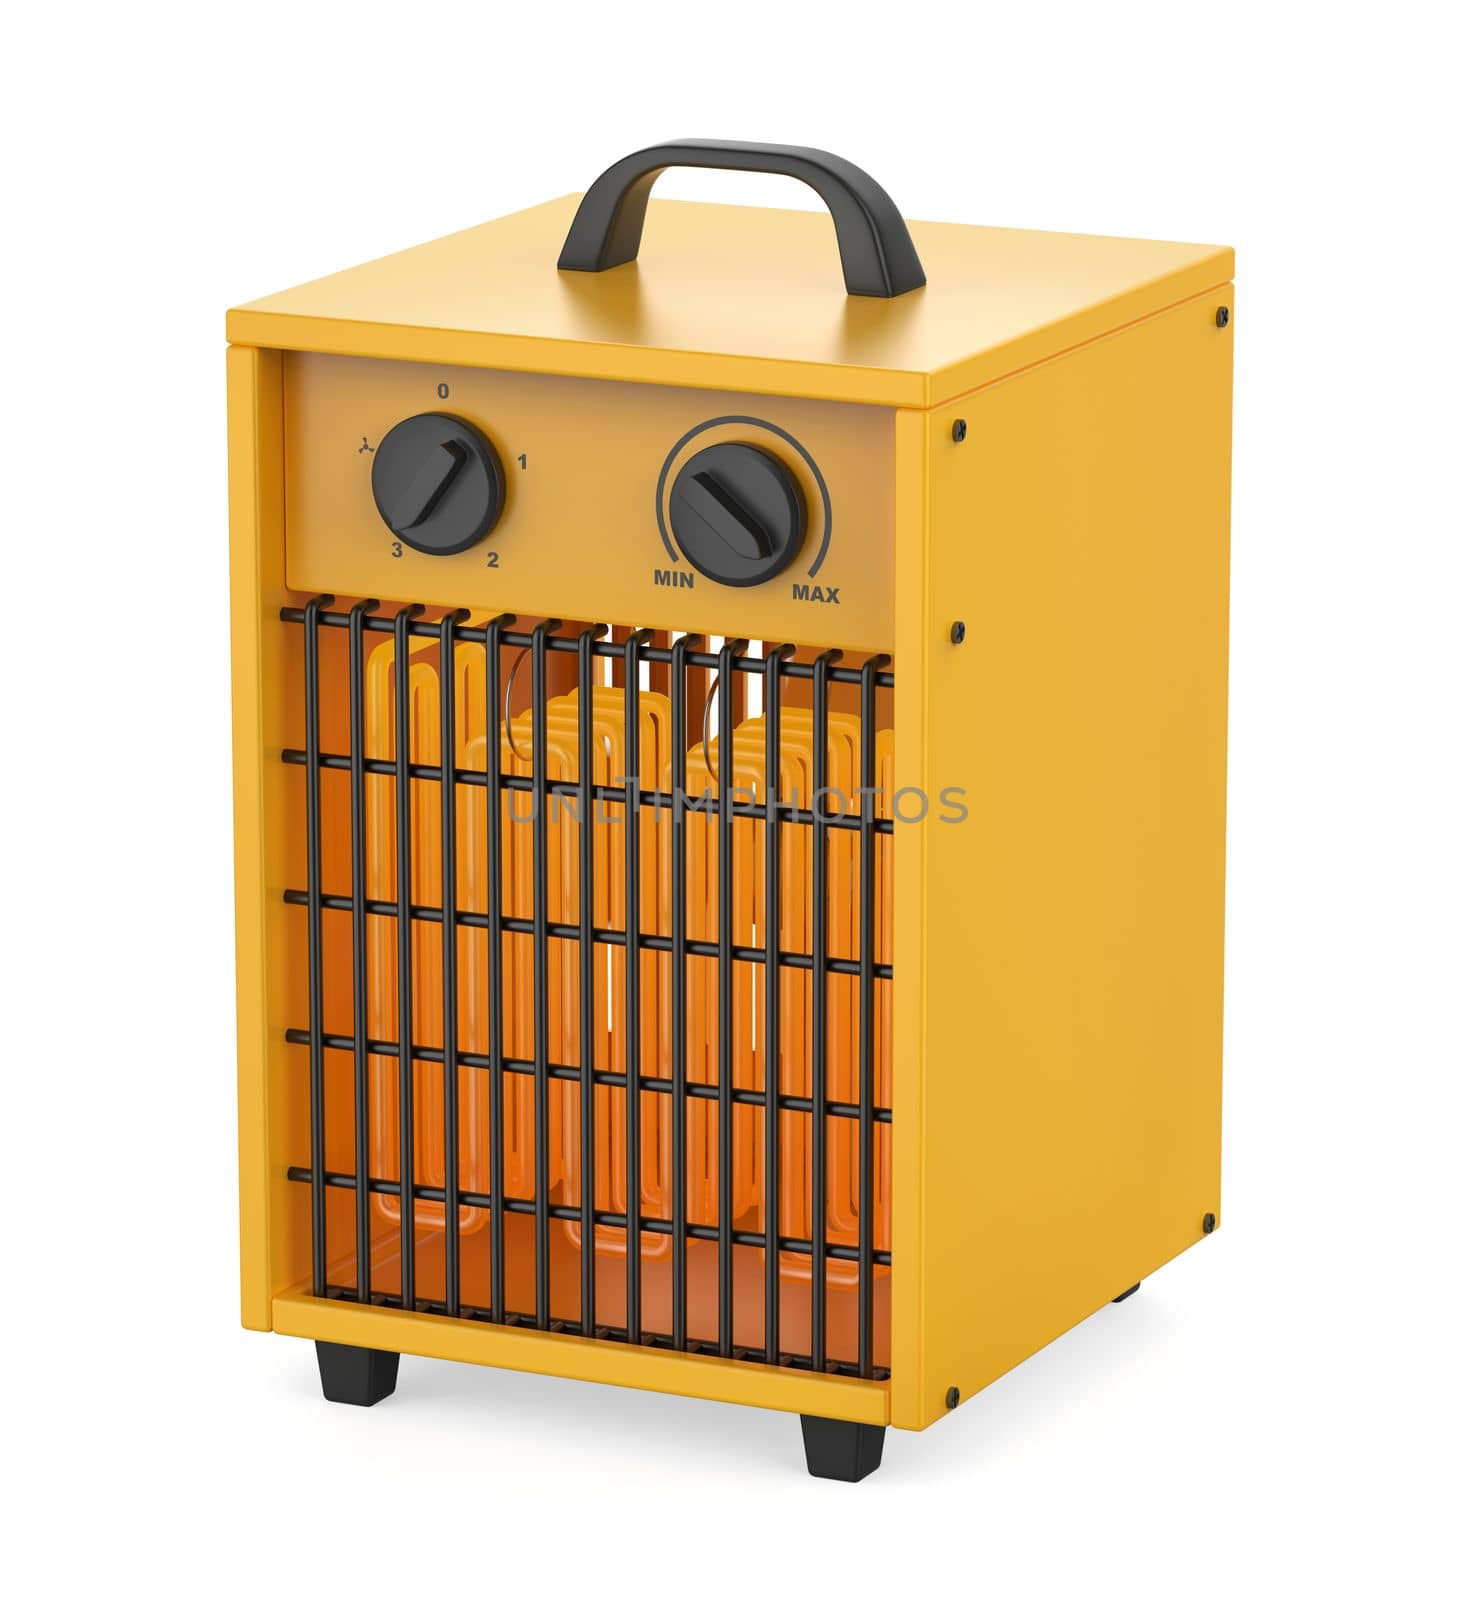 Industrial electric fan heater by magraphics